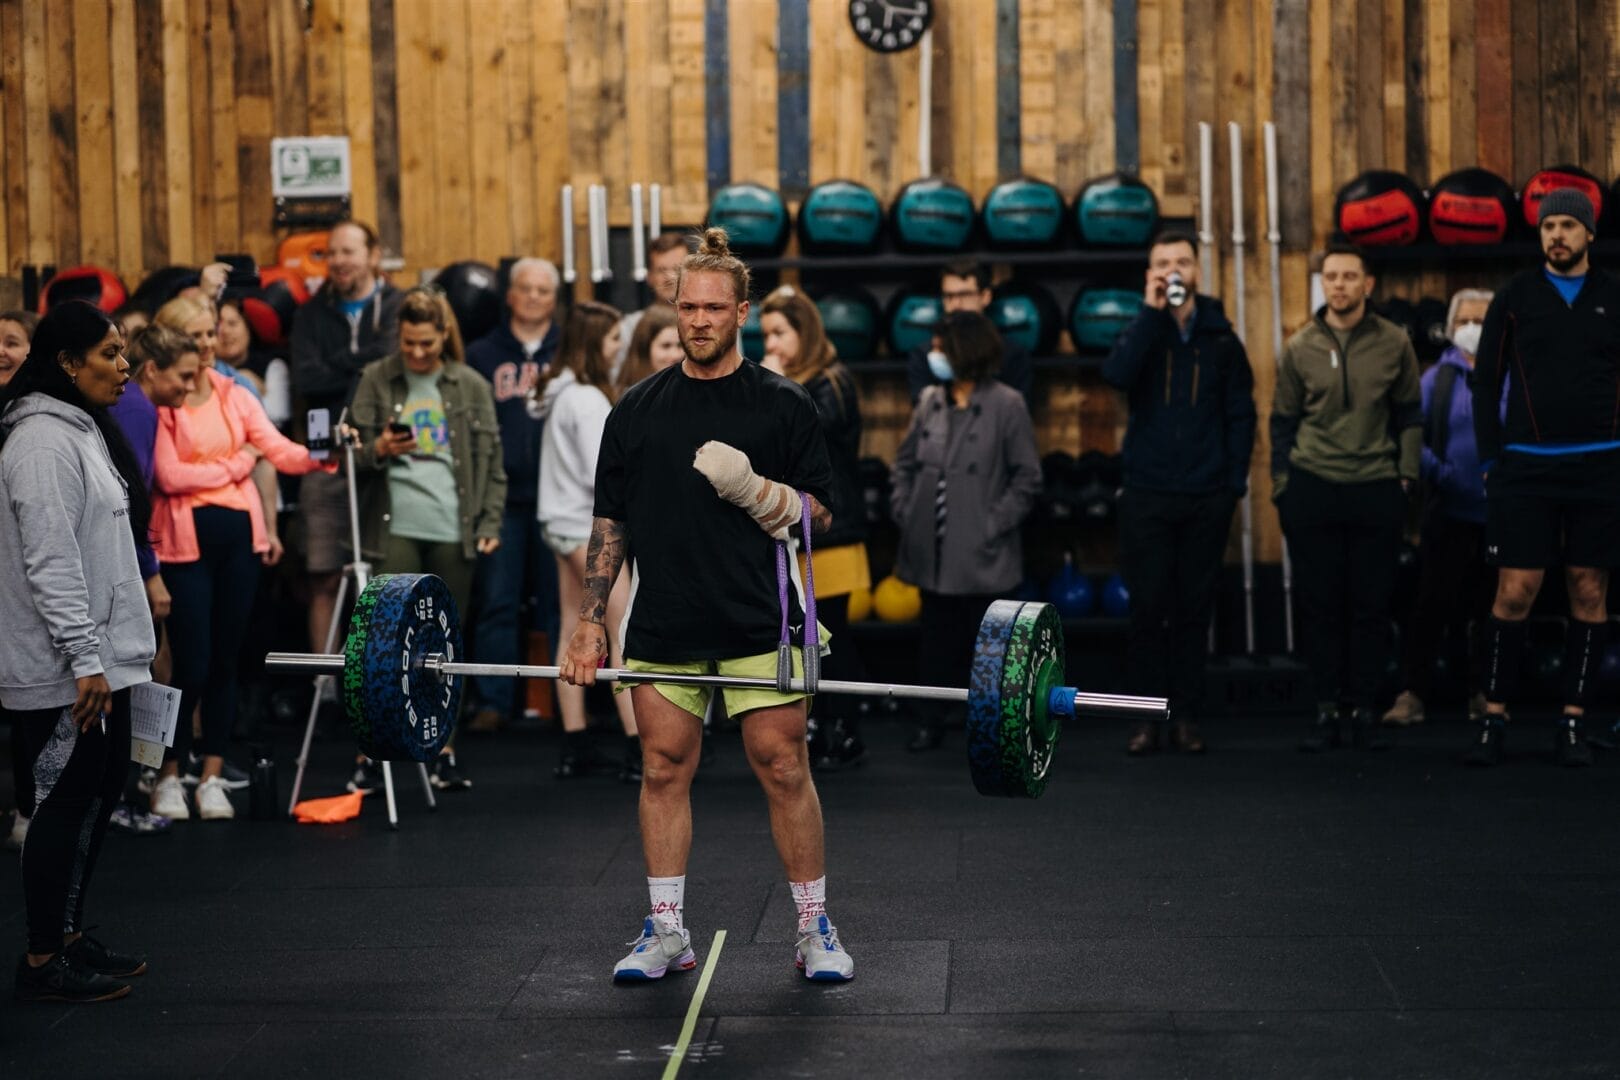 CrossFit Epsom offers adaptive training for injured members.